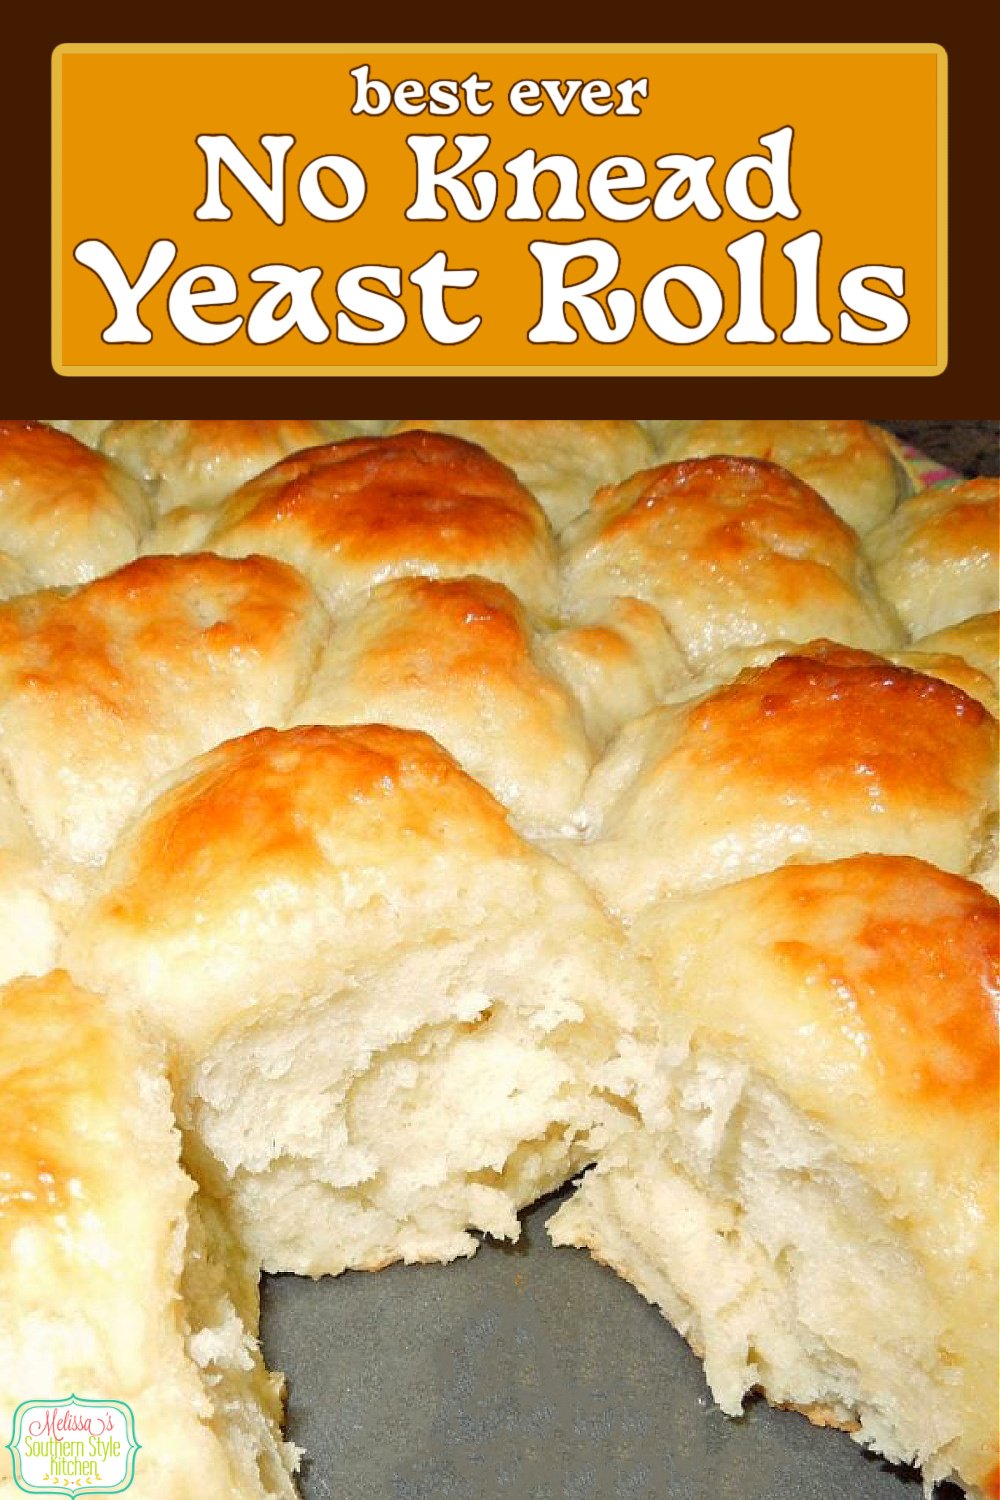 Bakers of all skill levels can make these fluffy mouthwatering No Knead Yeast Rolls #nokneadbread #nokneadrolls #yeastrolls #rolls #breadrecipes #bread #bestyeastrolls #fallbaking #holidayrecipes #dinnerrolls #homemadebread #food #recipes #southernfood #southernrecipes #melissassouthernstylekitchen via @melissasssk